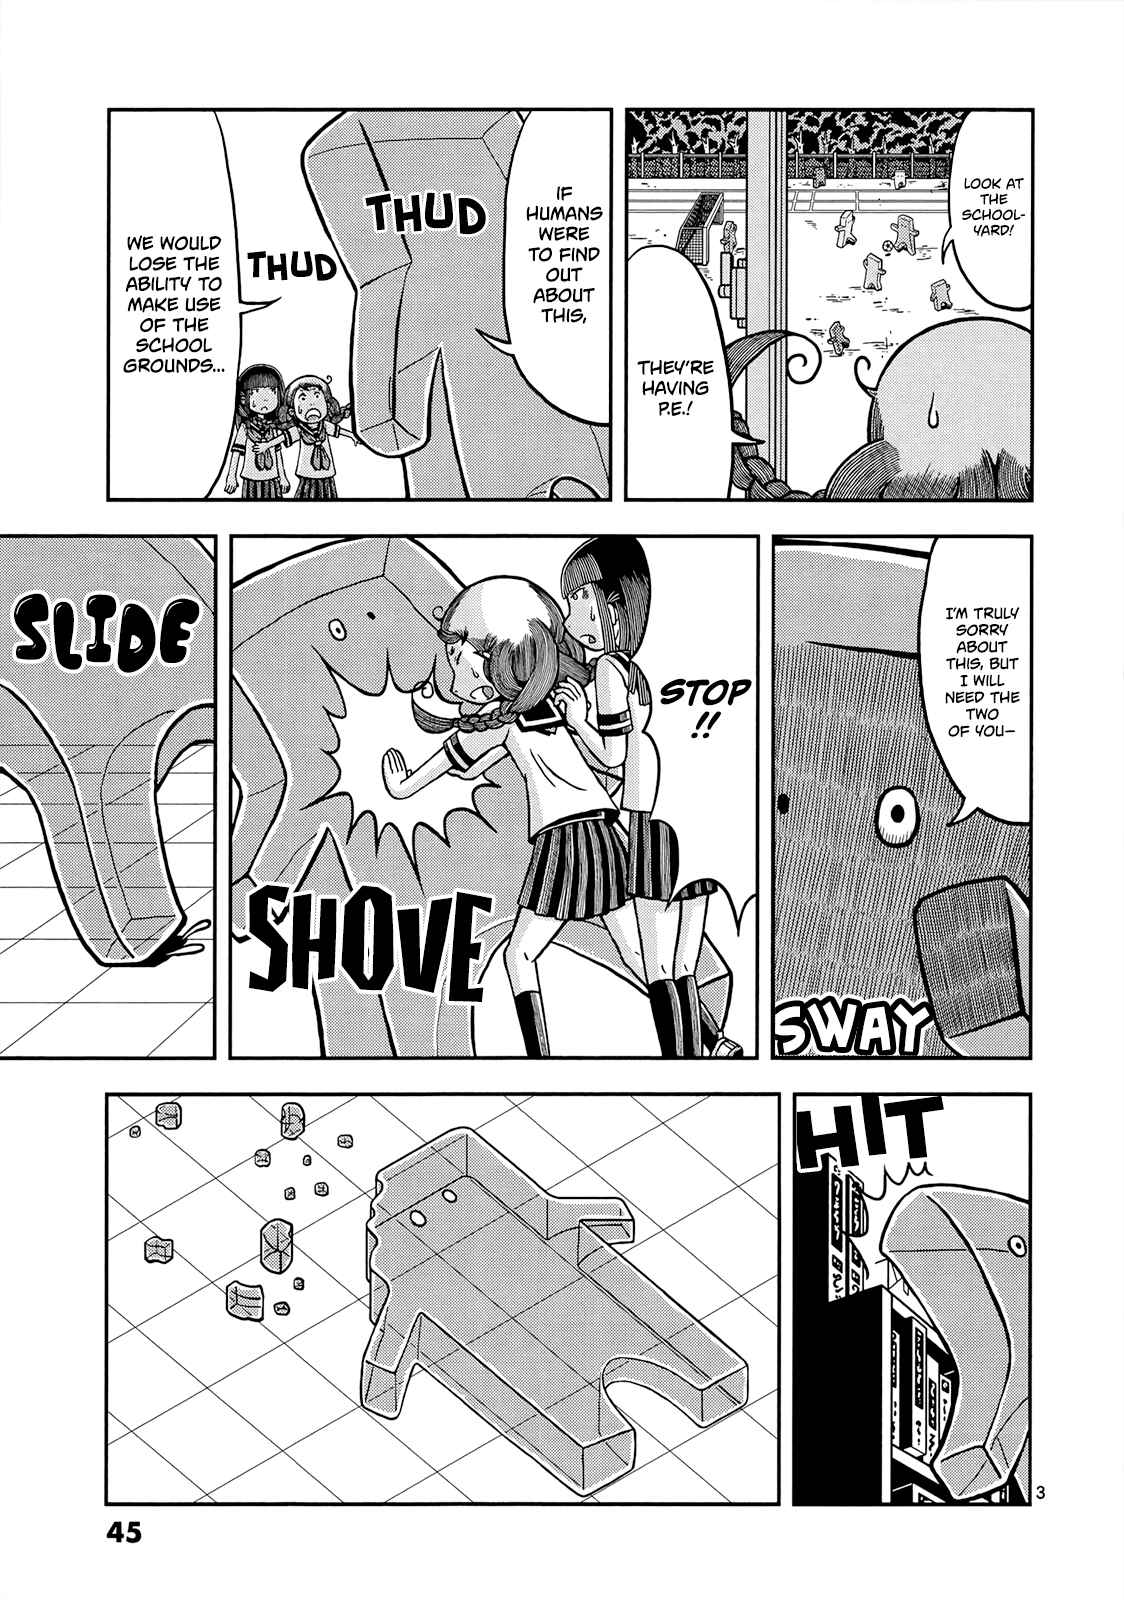 Curiosity Killed the Schoolgirl Vol. 1 Ch. 4 Staying Late, with Just a Bit of Sugar...